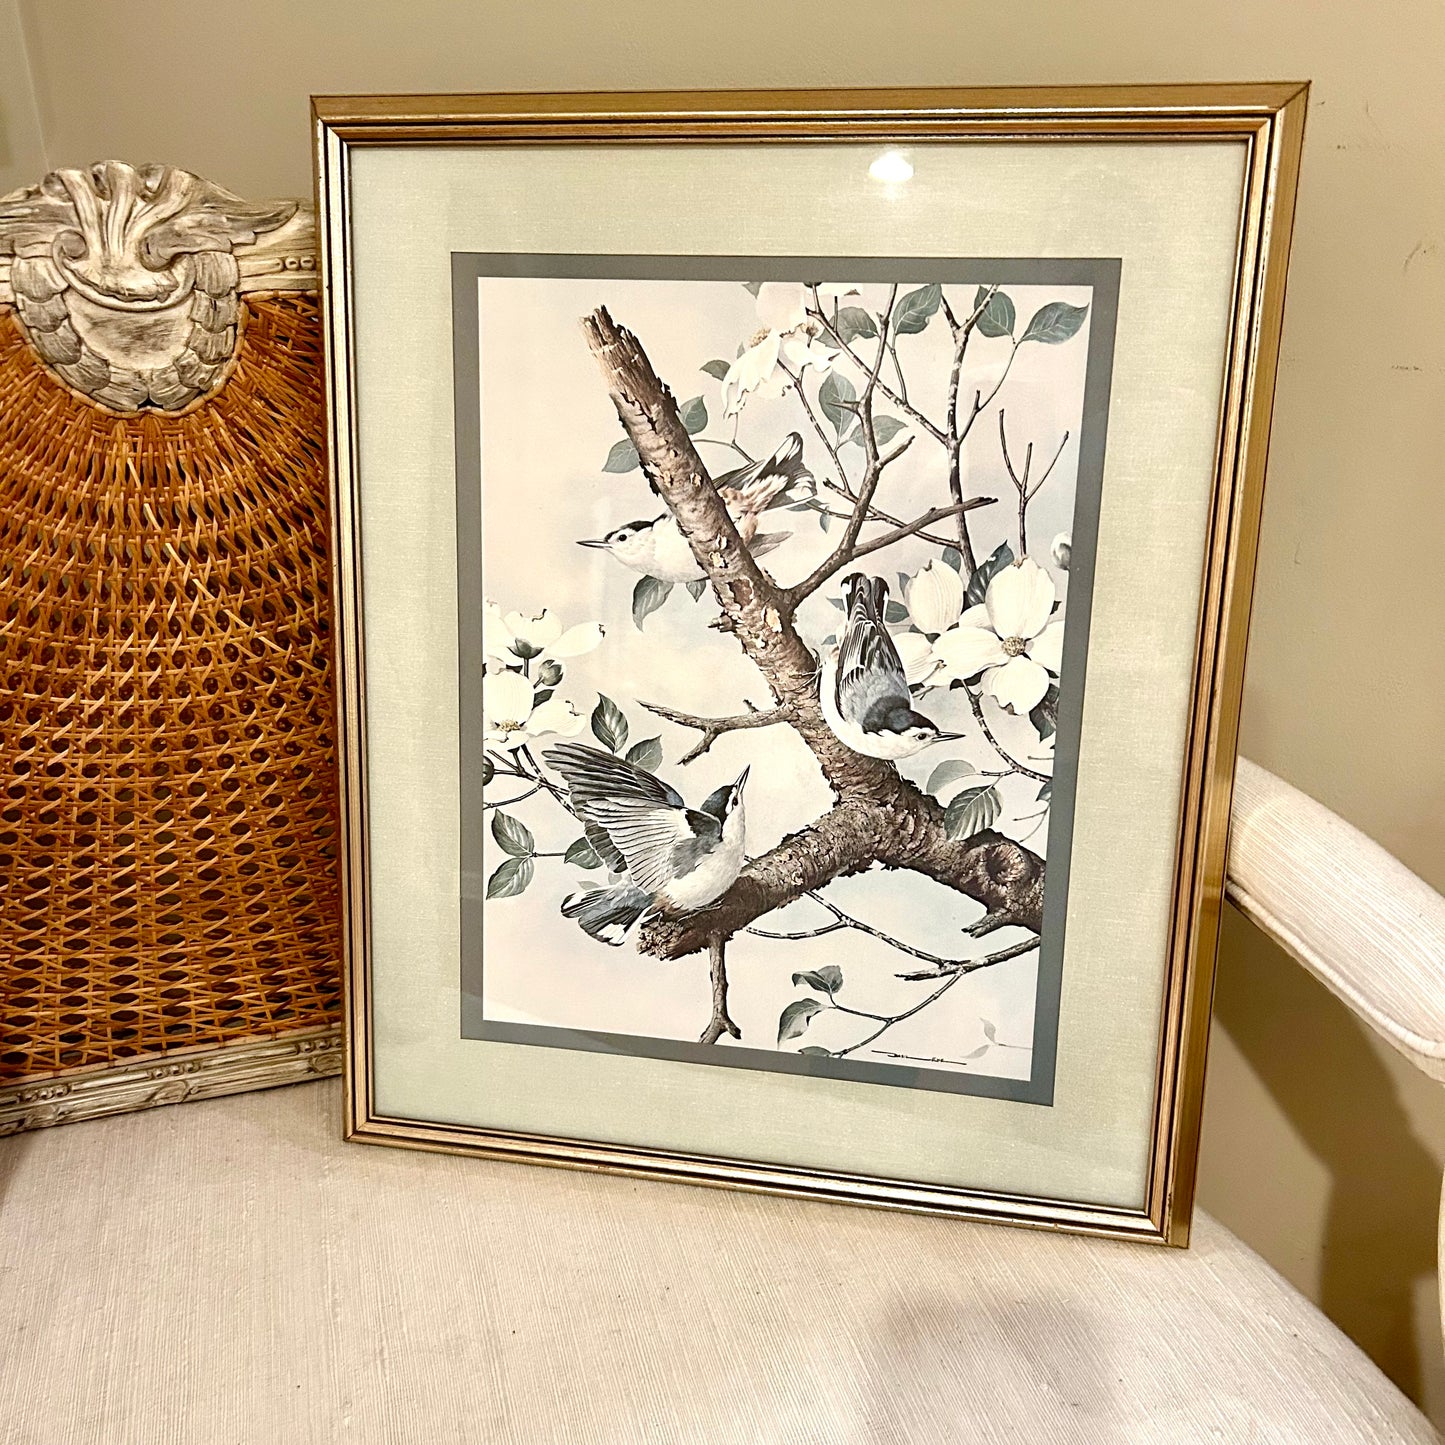 lovely vintage Audubon inspired bird and botanicals color print wall art by artist Basil